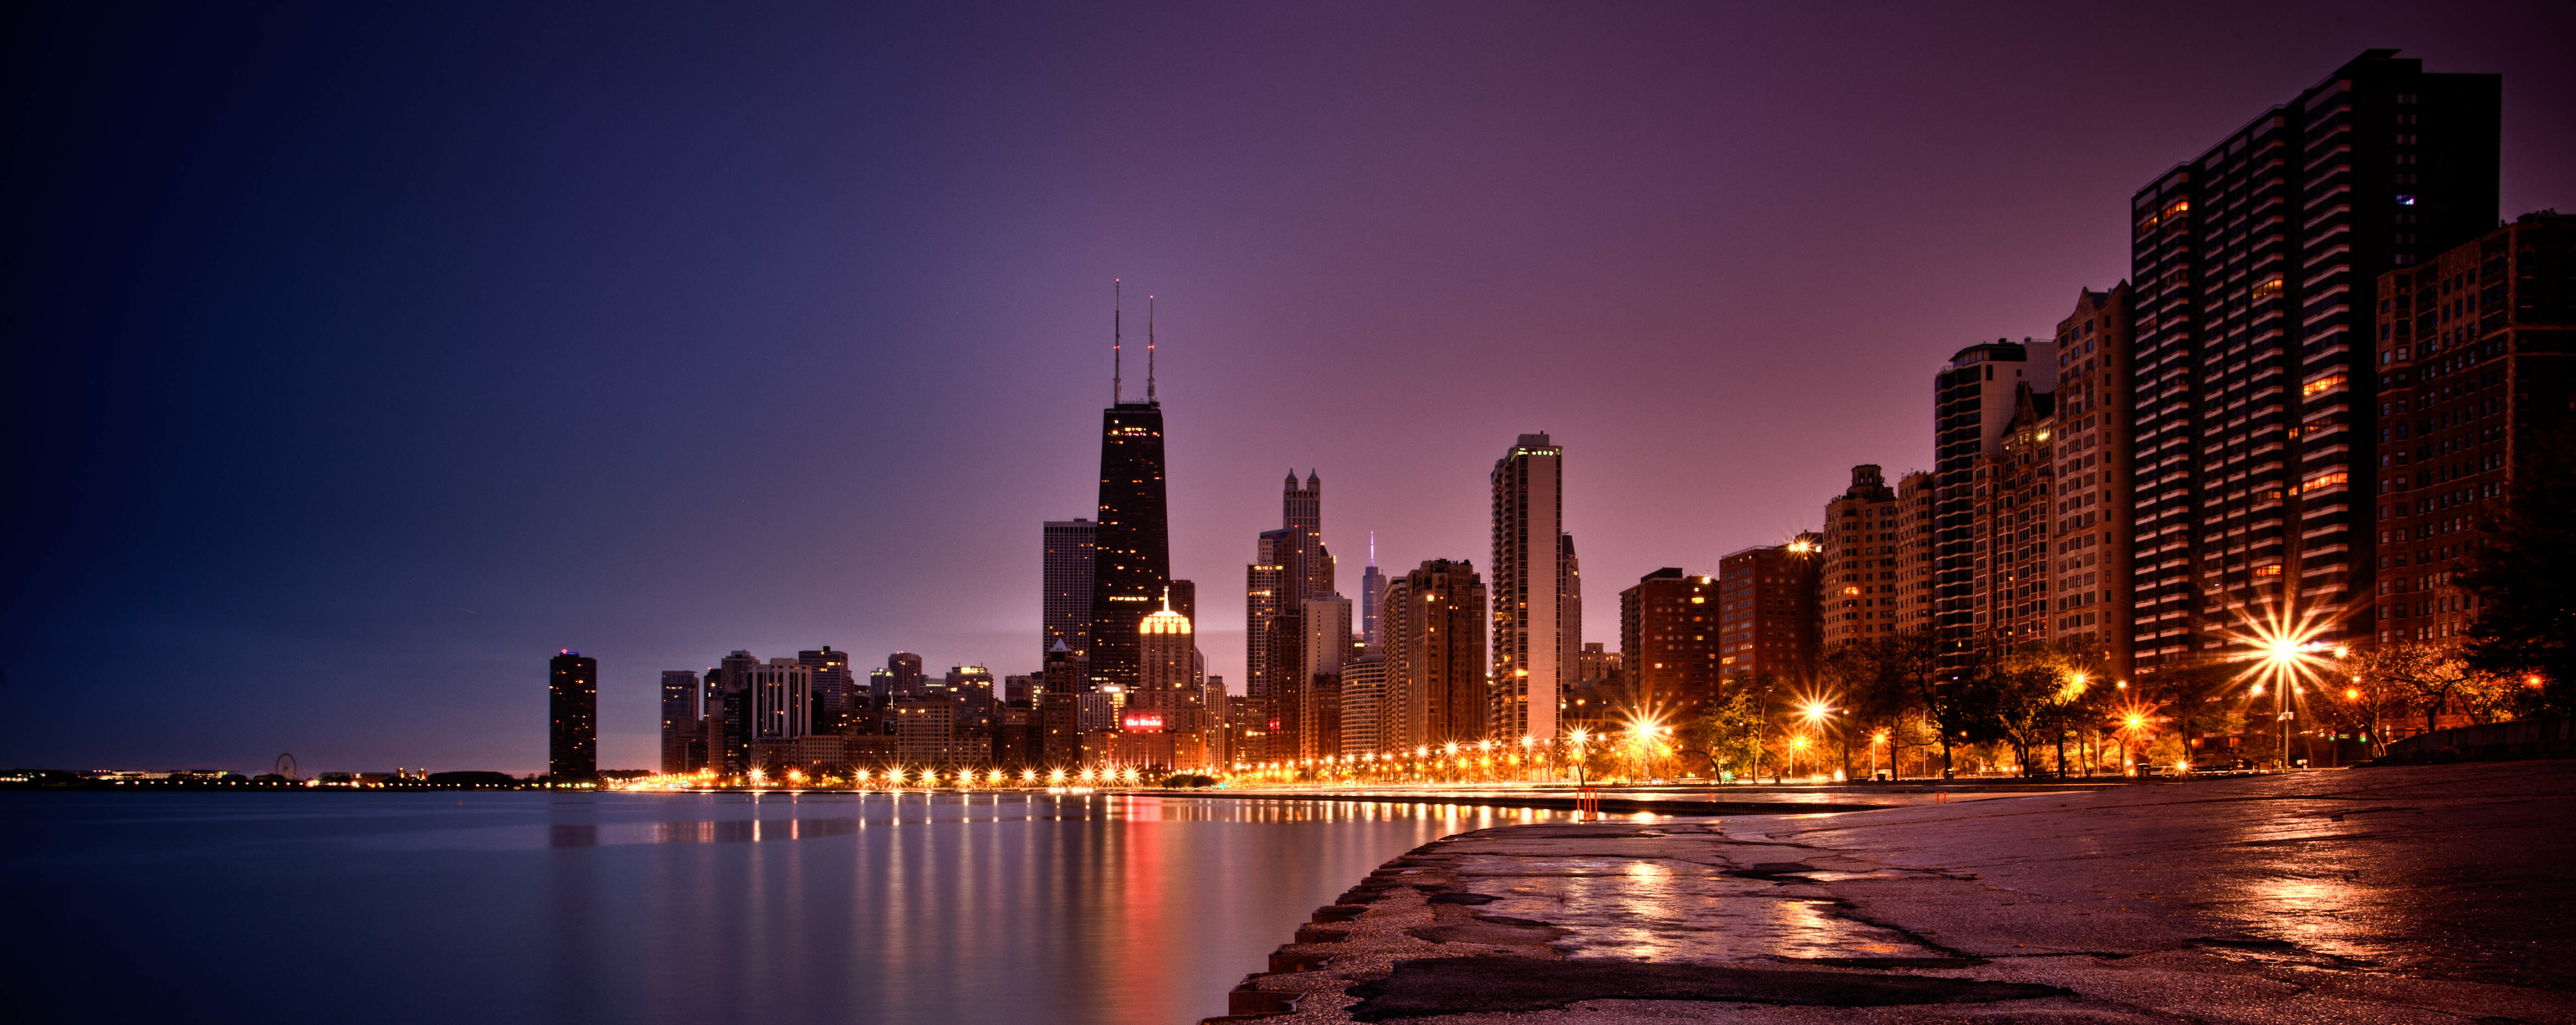 Chicago City Wallpapers